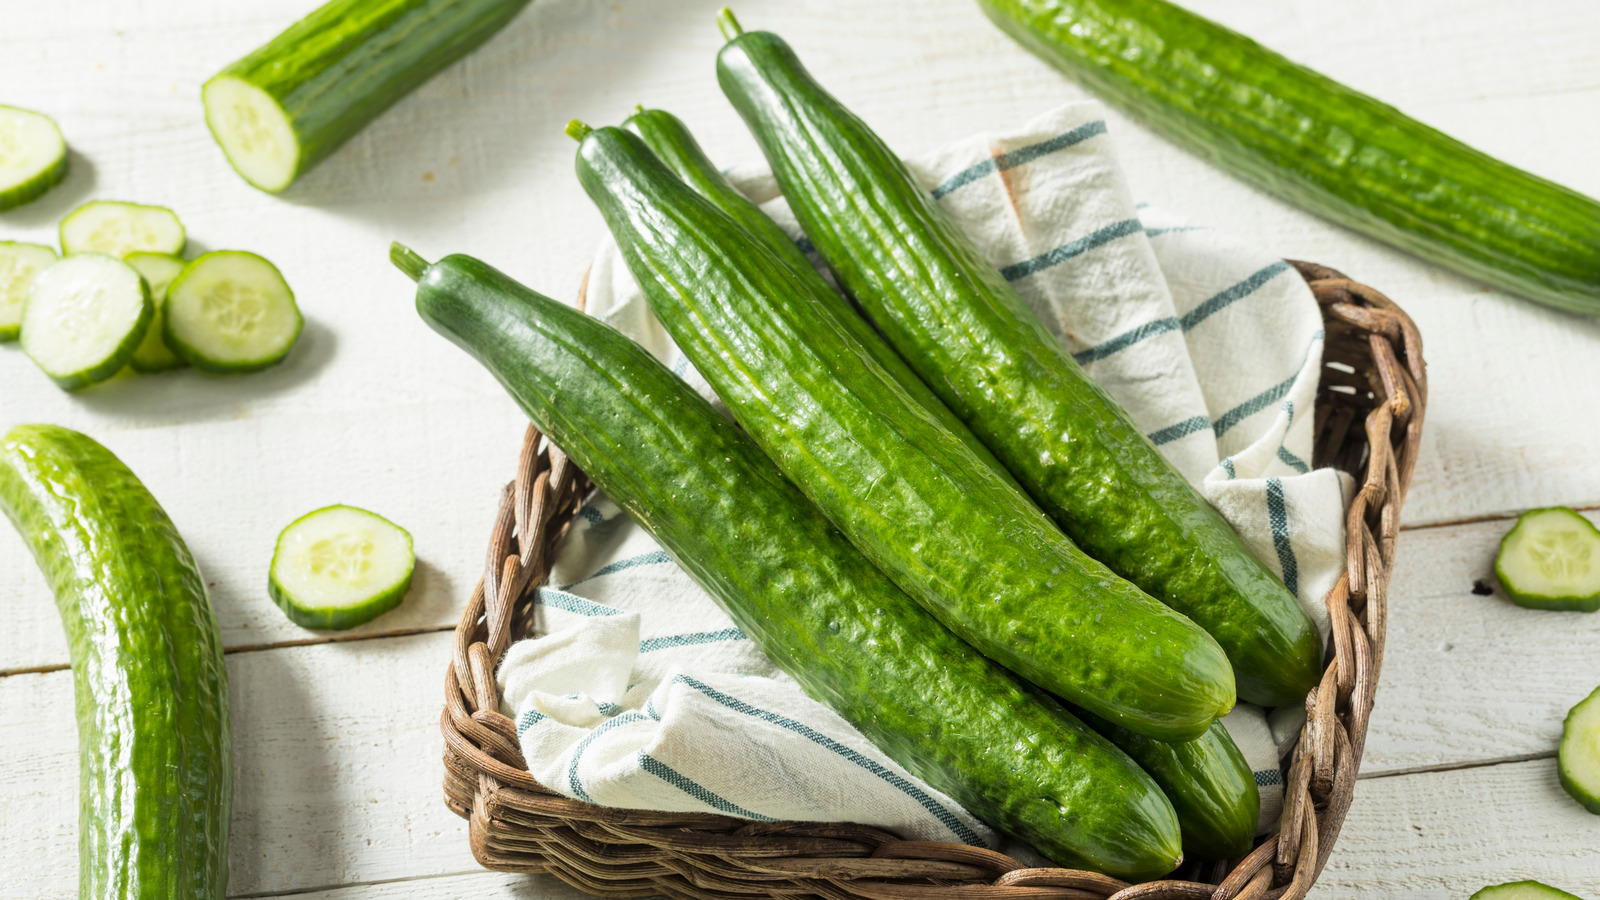 https://www.tastingtable.com/img/gallery/what-makes-english-cucumbers-different/l-intro-1642188263.jpg